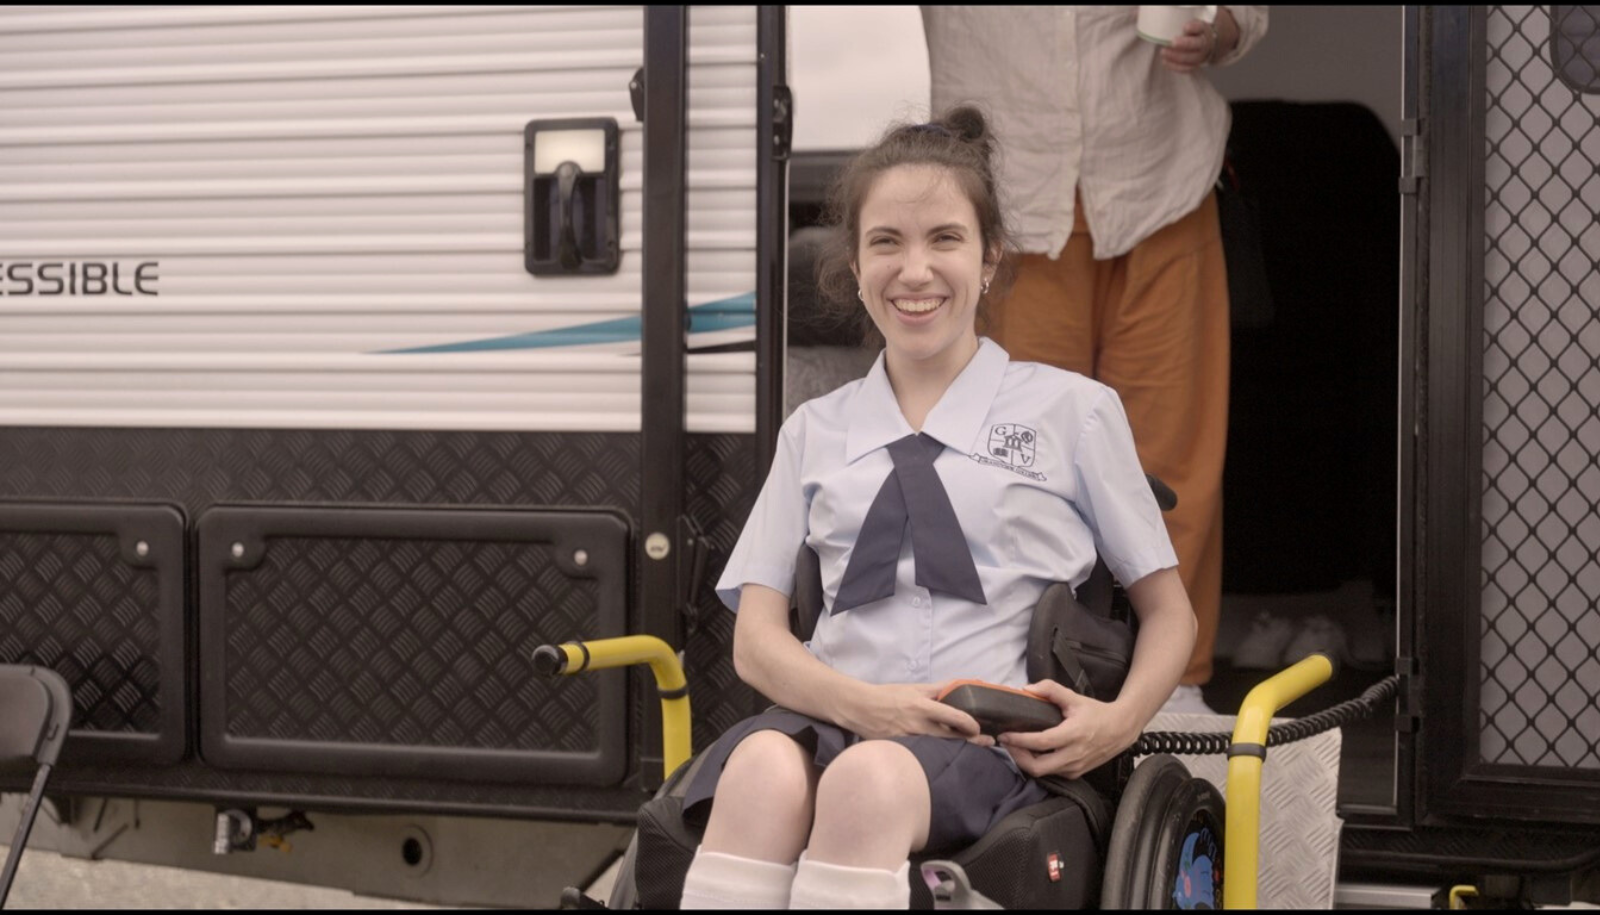 Hannah Diviney is sitting in her accessible wheelchair on the sets of ‘Audrey’. She is wearing a light-blue shirt with a criss-cross bow tie and smiling at the camera. There is wheelchair-accessible caravan behind her.